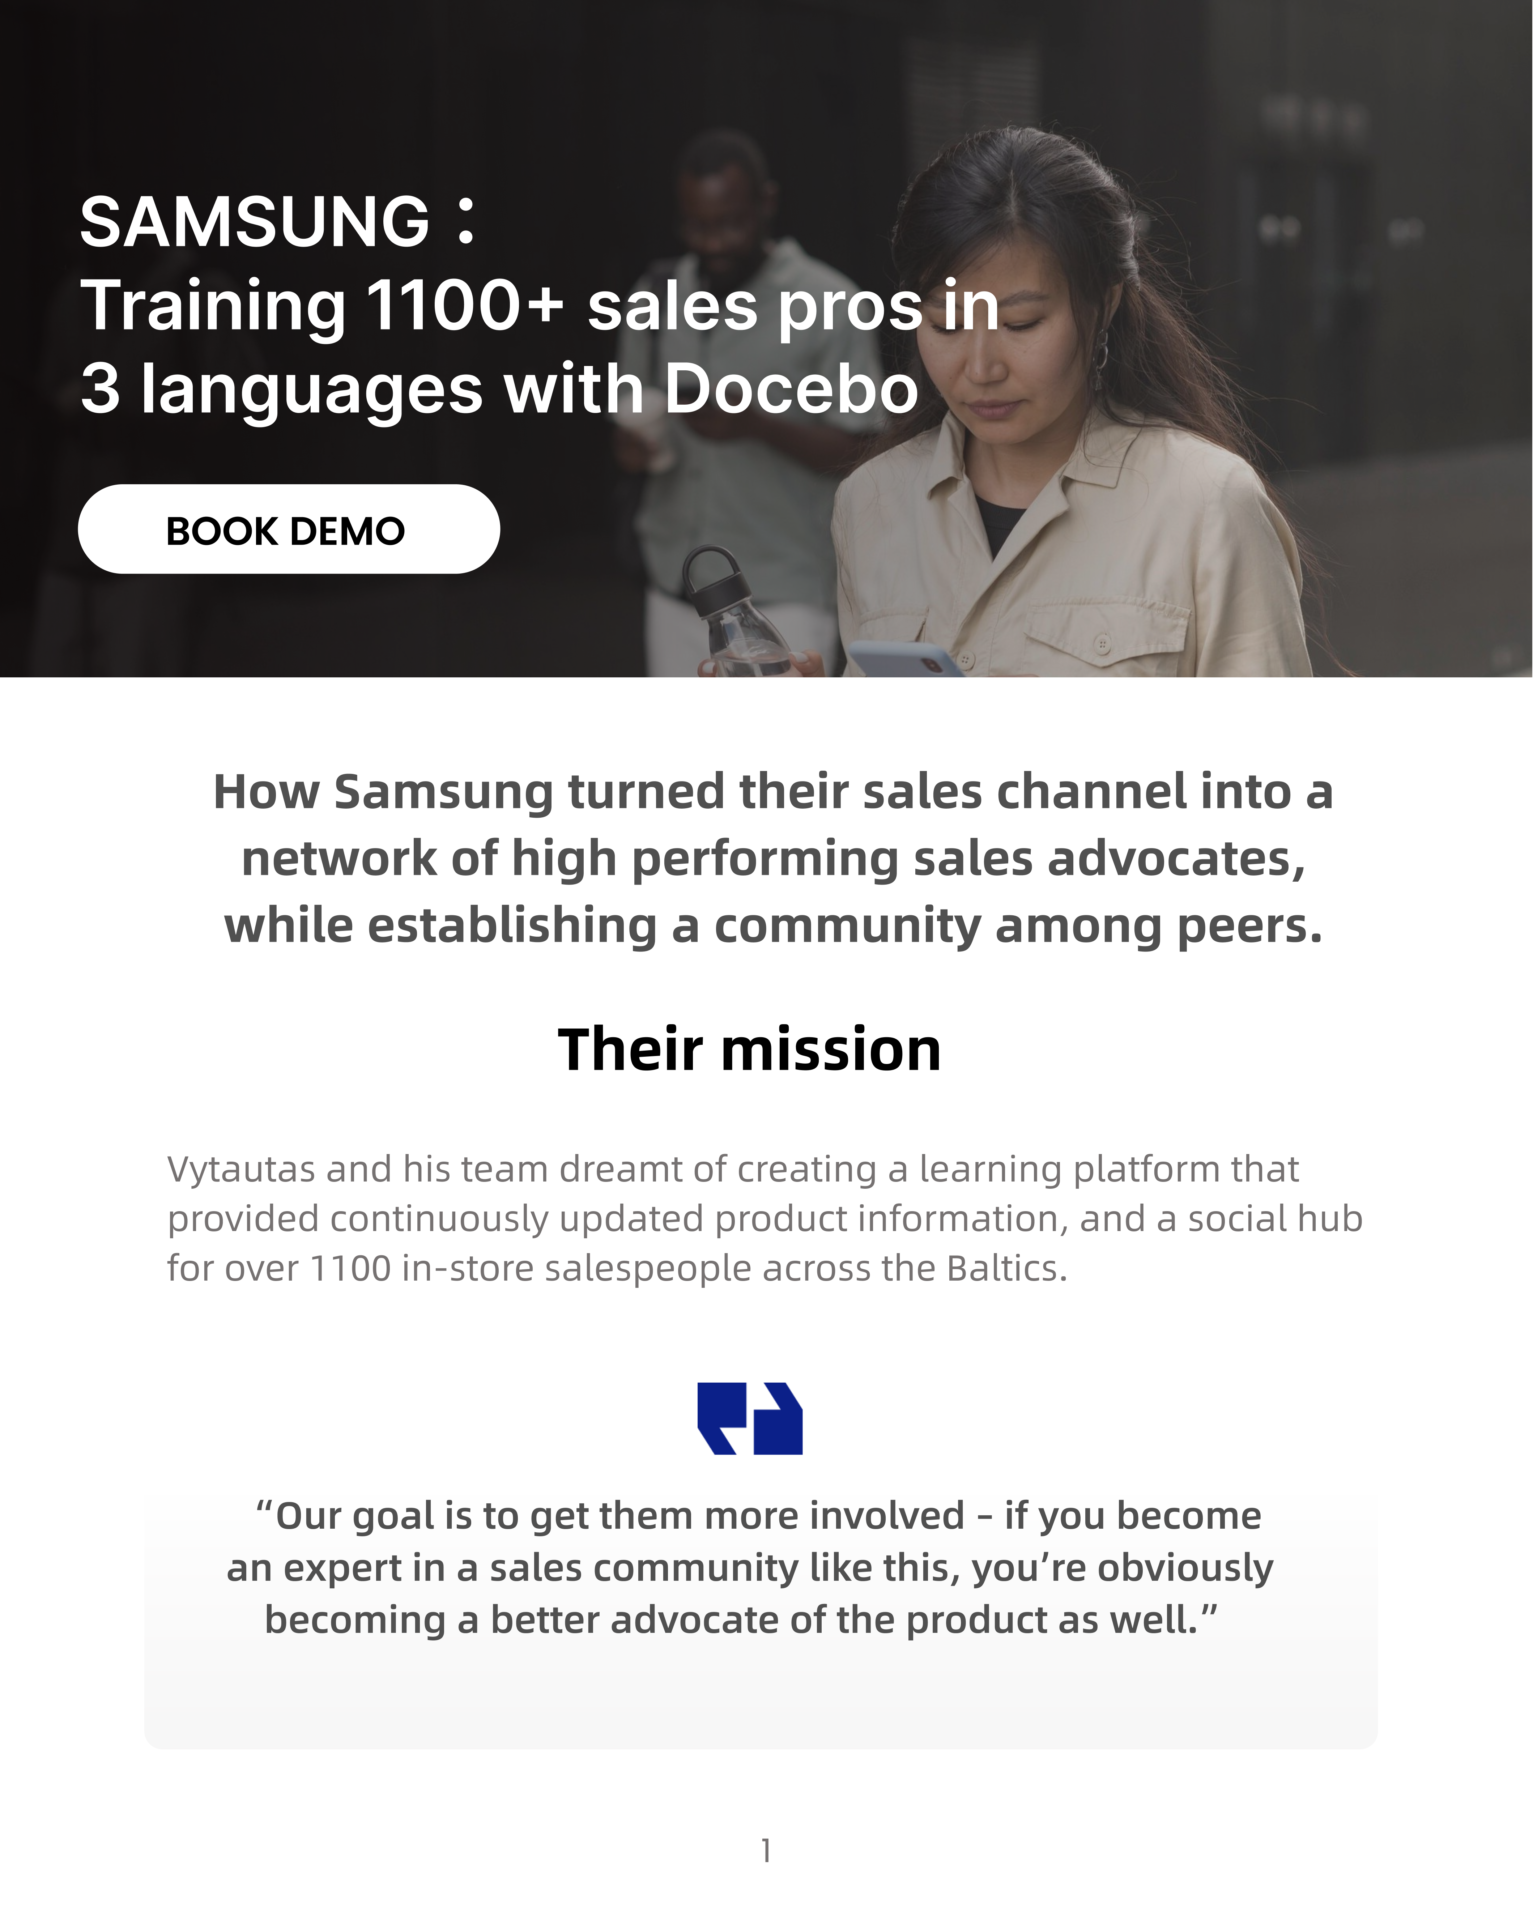 SAMSUNG: Training 1100+ Sales Pros in 3 Languages With Docebo插图